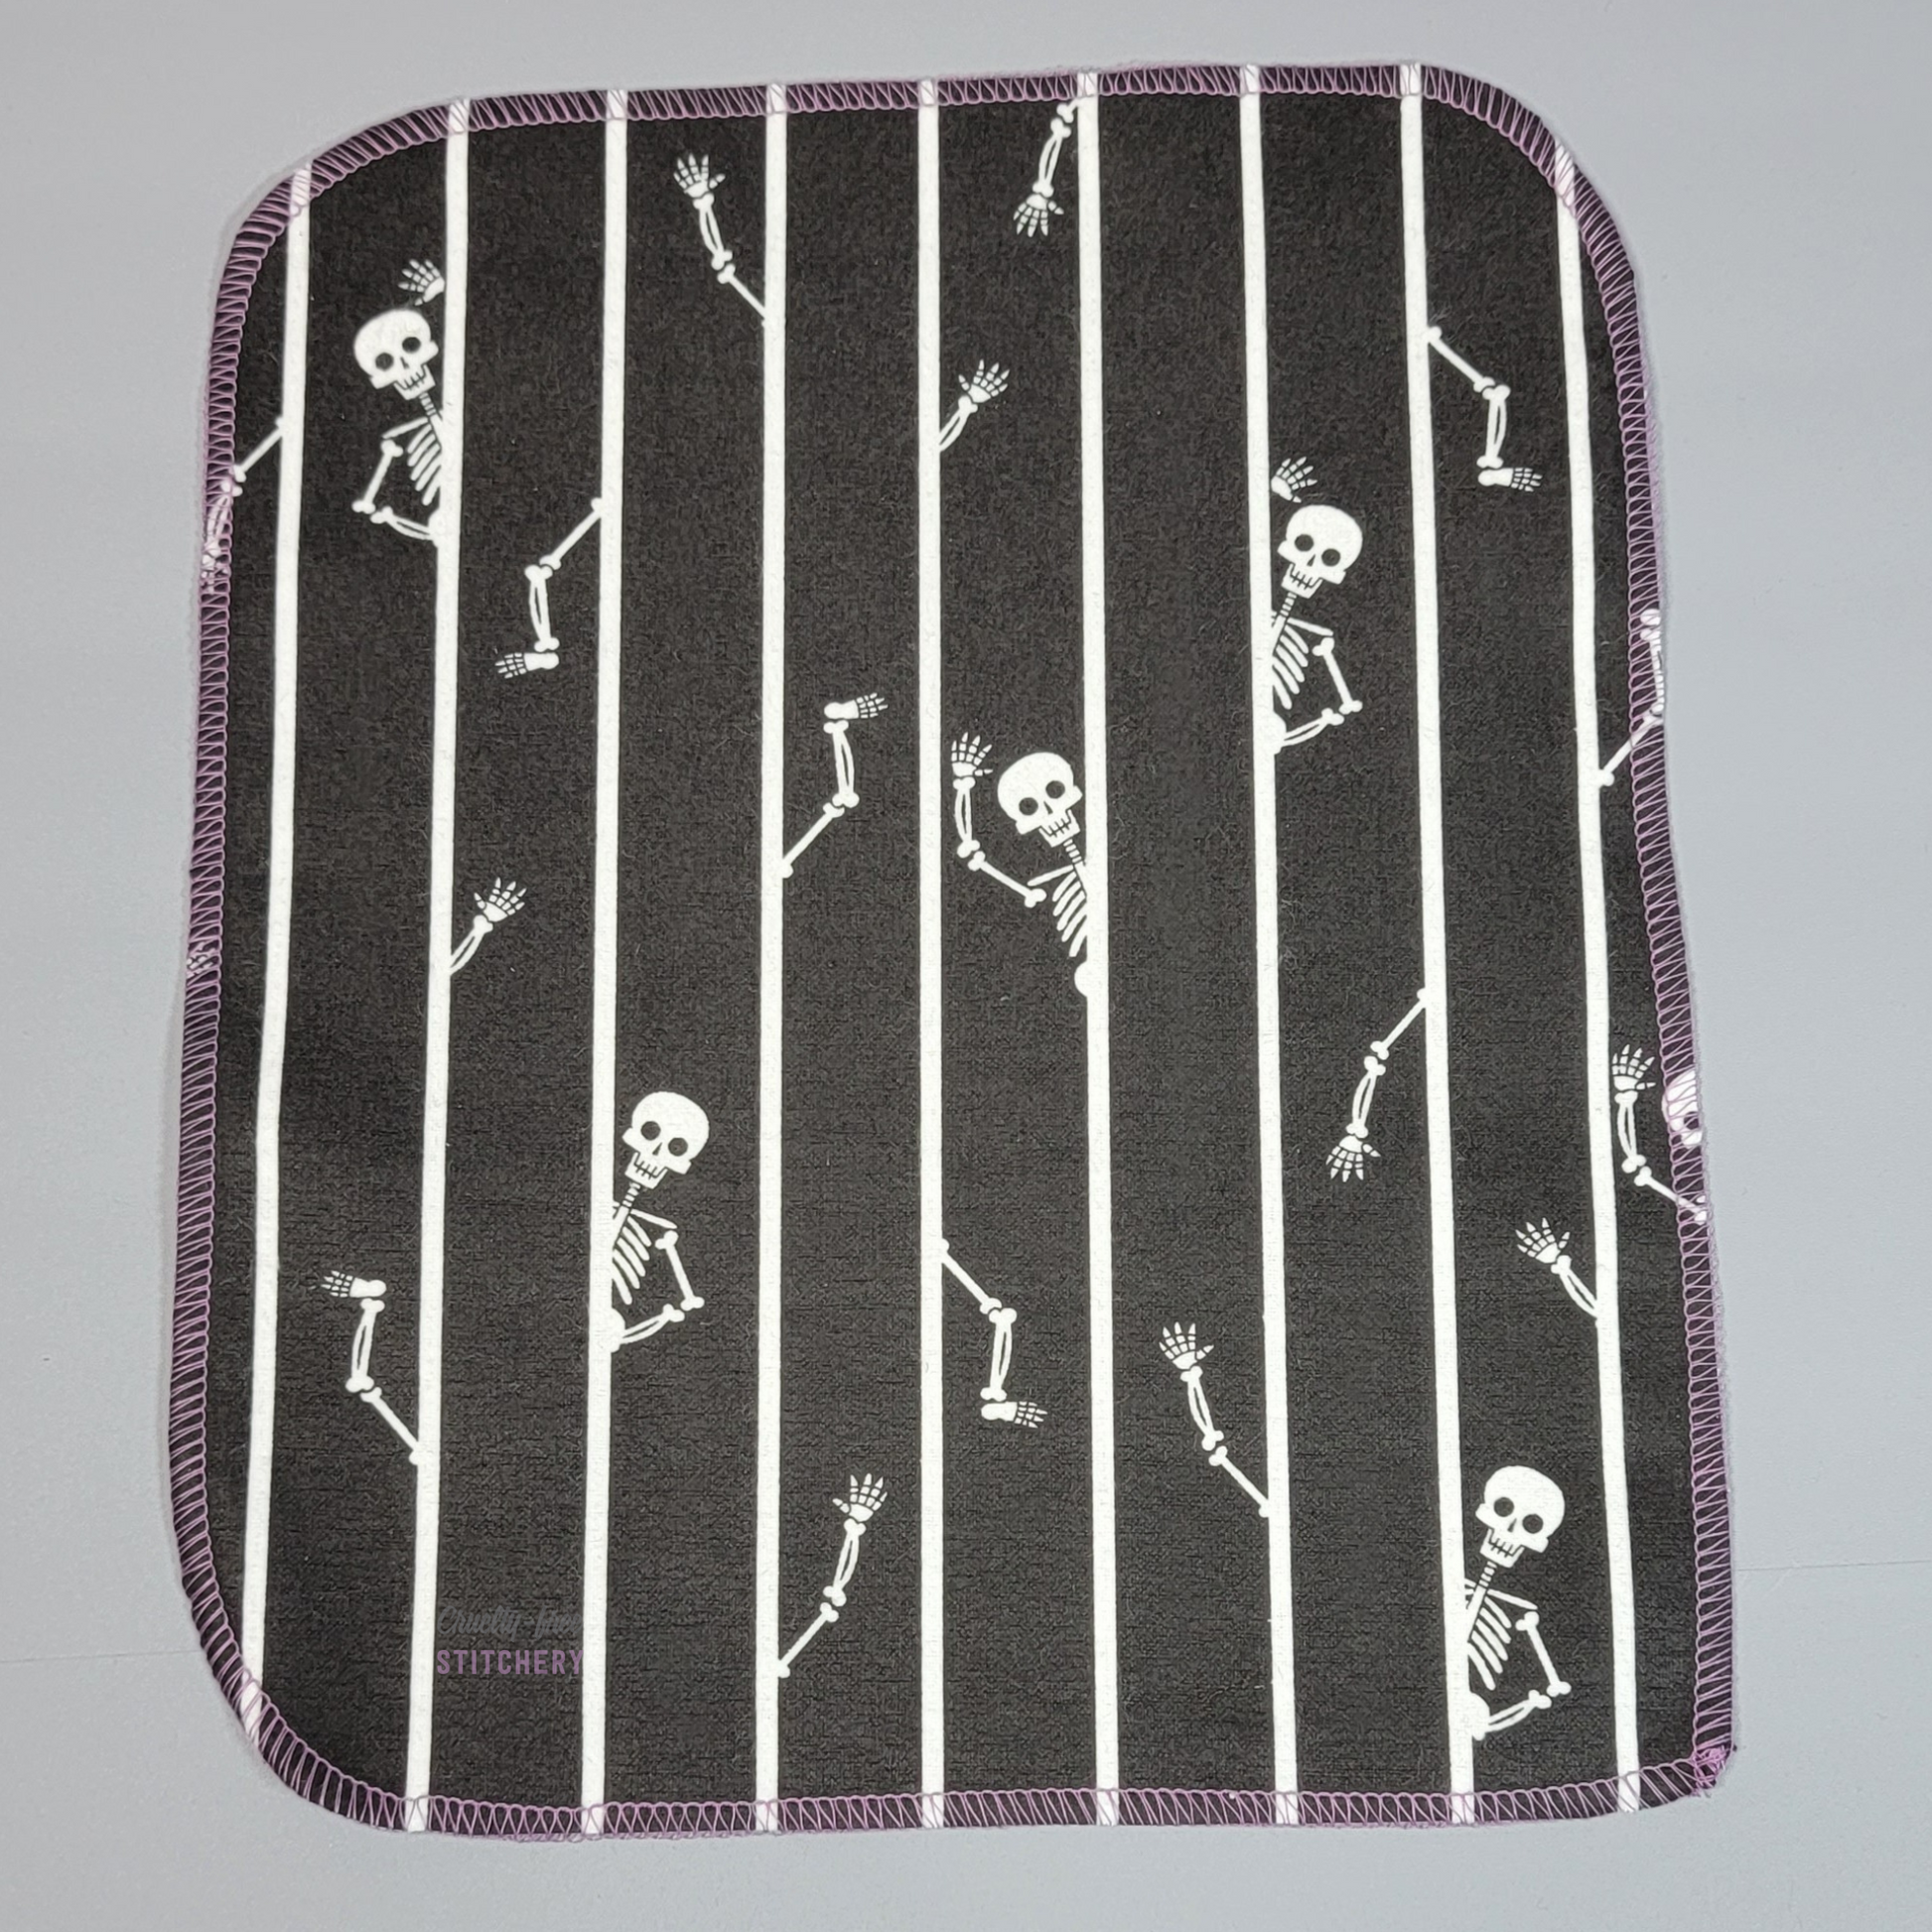 A black NonPaper Towel with vertical white stripes and skeleton heads, arms, and legs peeking out from behind the lines.